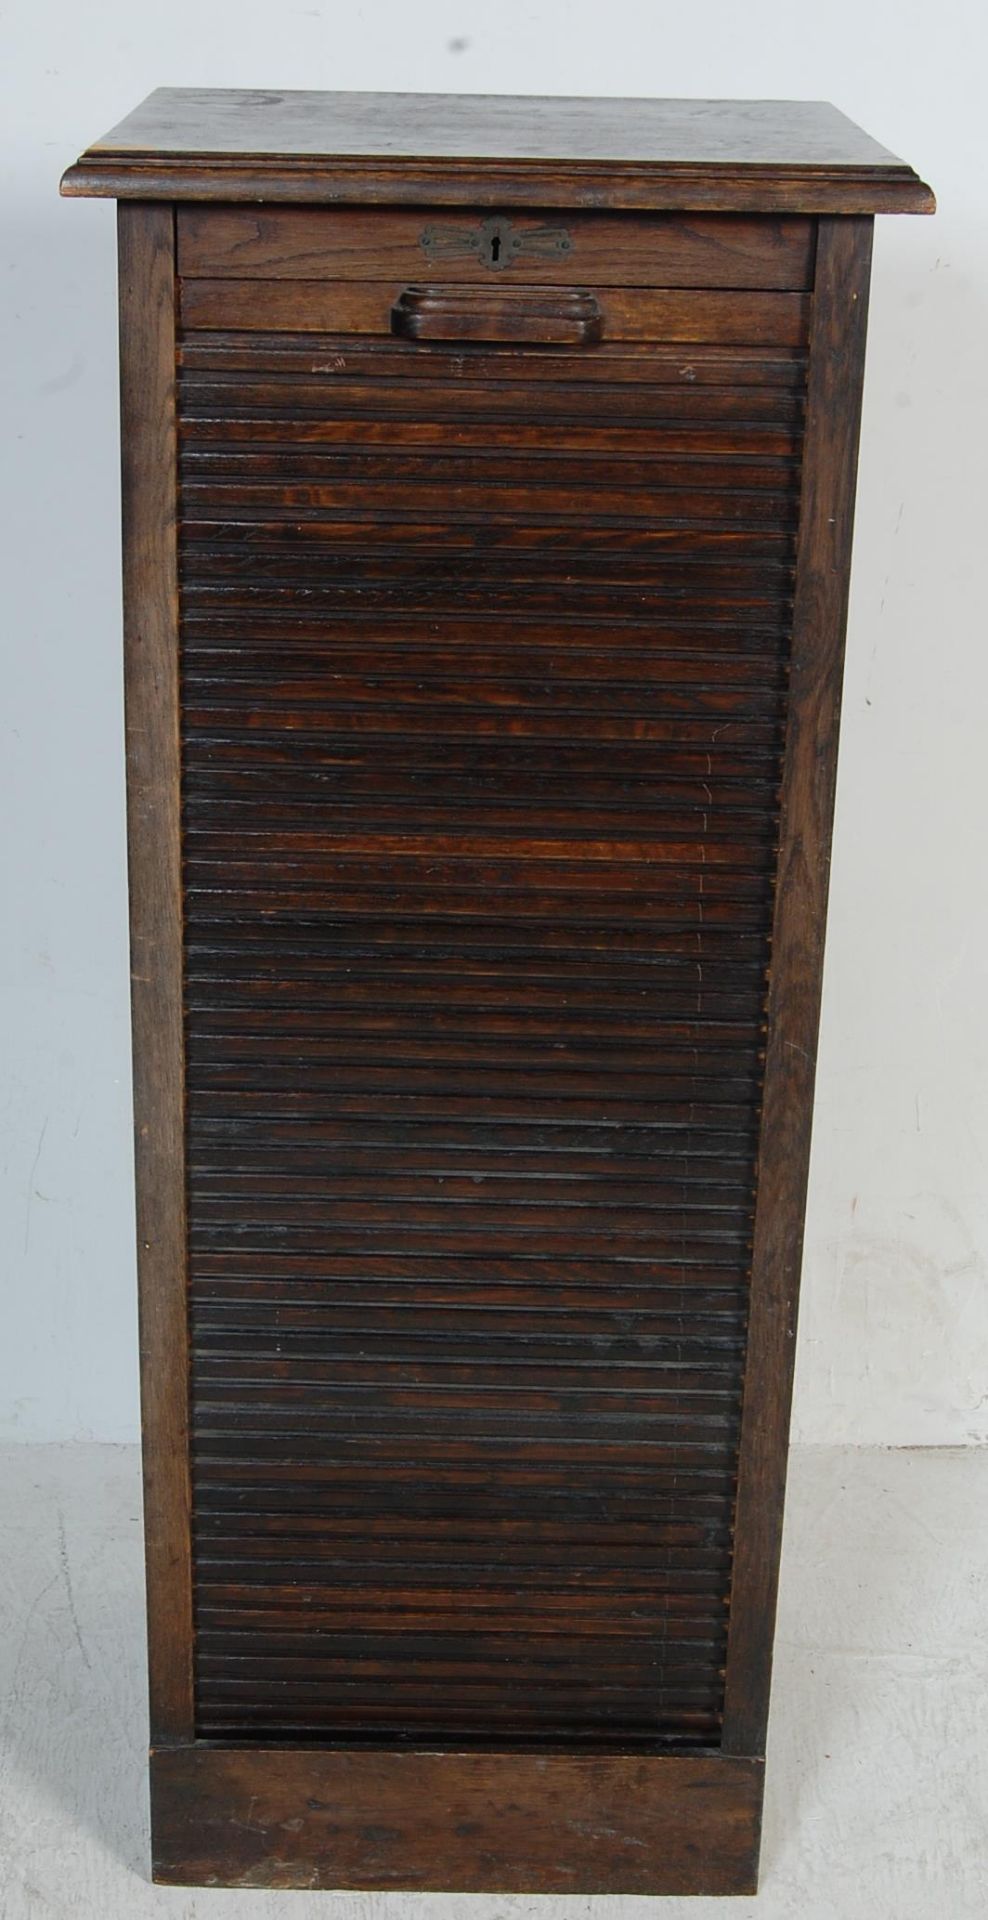 EARLY 20TH CENTURY ART DECO TAMBOUR ROLL RILING CABINET - Image 2 of 6